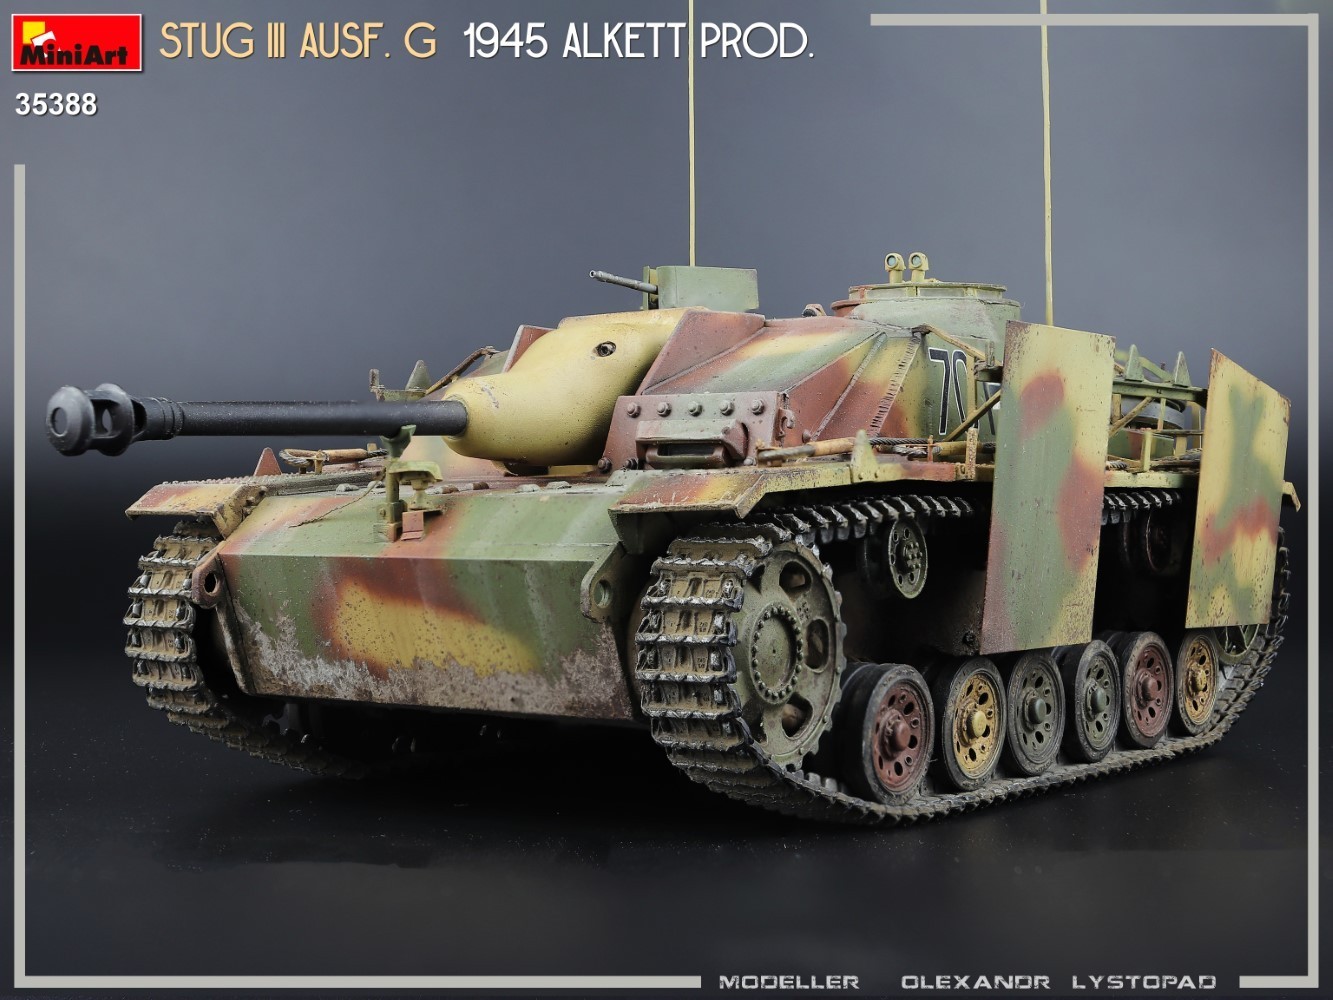 MiniArt to Release Highly Detailed 1/35 StuG III Ausf. G 1945 Alkett Prod. Model Kit Painting and Marking-10